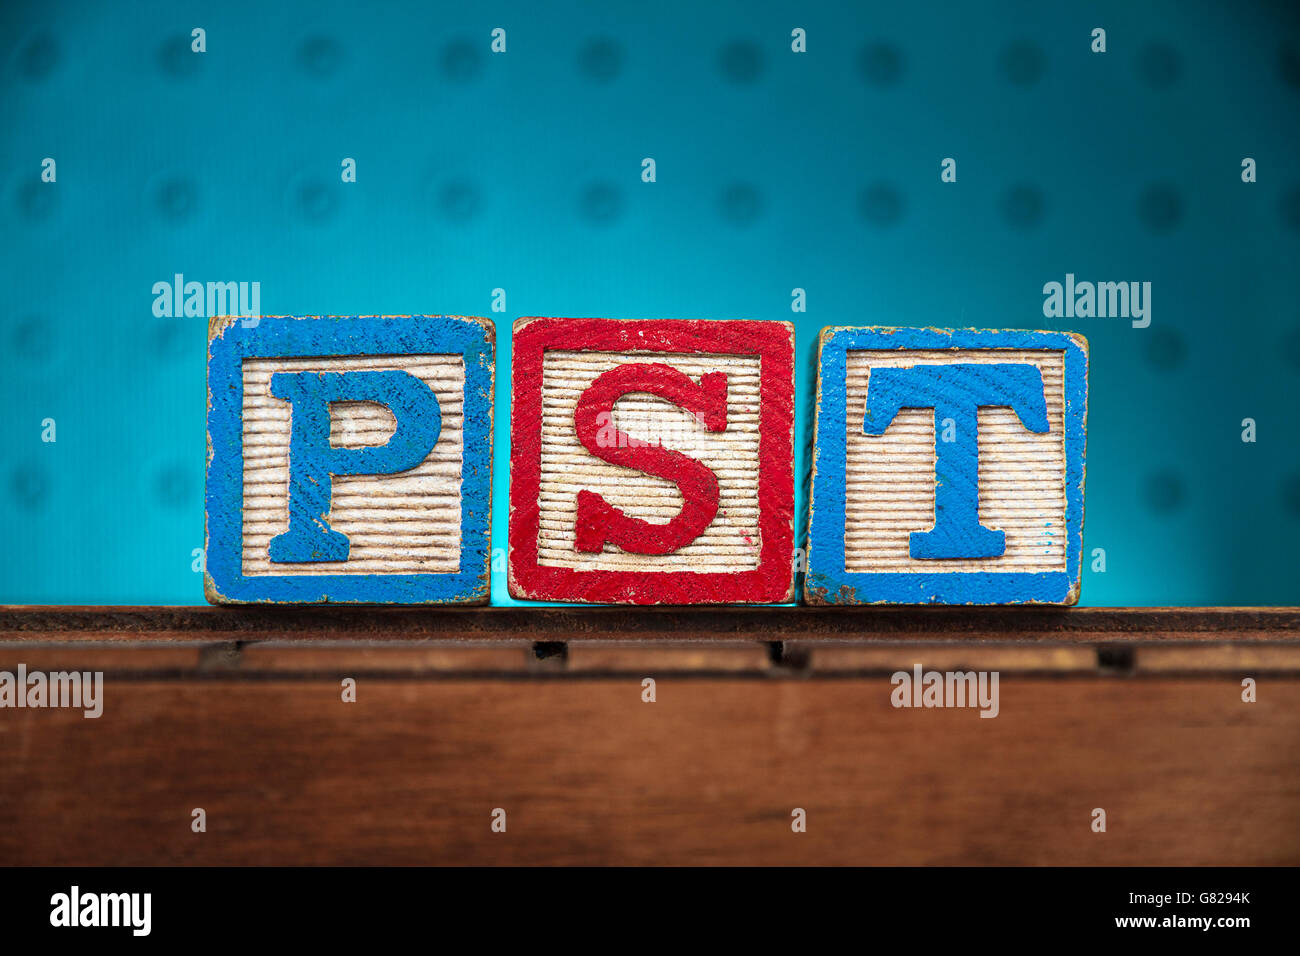 The word 'pst' spelled with letters on wooden toy blocks Stock Photo